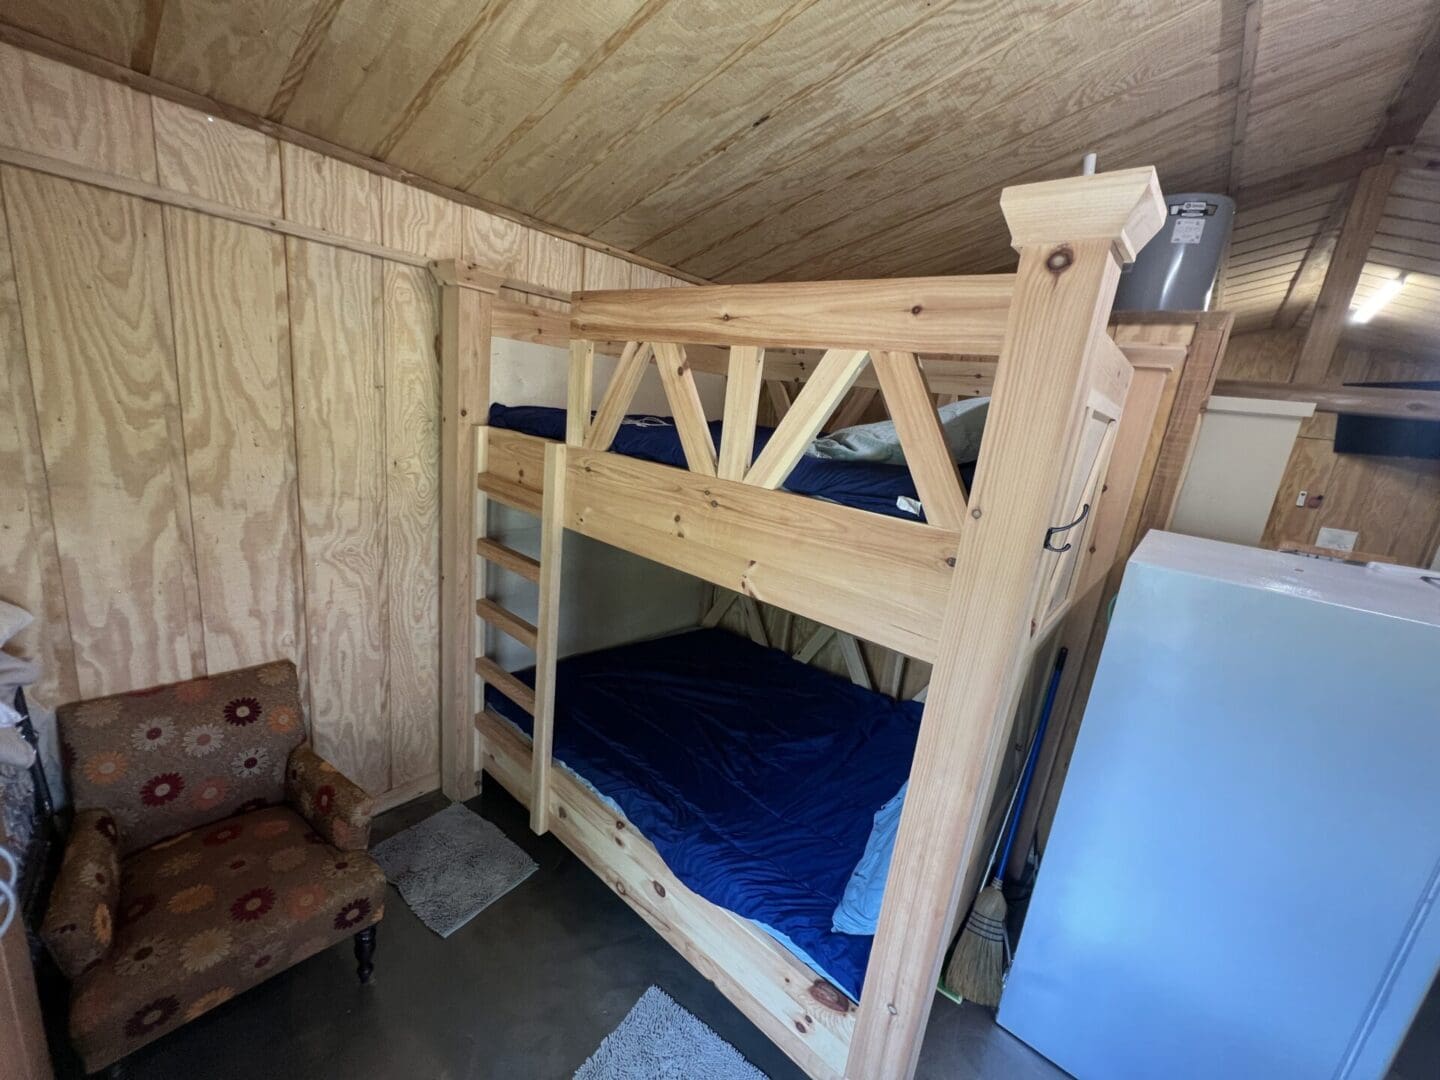 A room with two bunk beds and a couch.